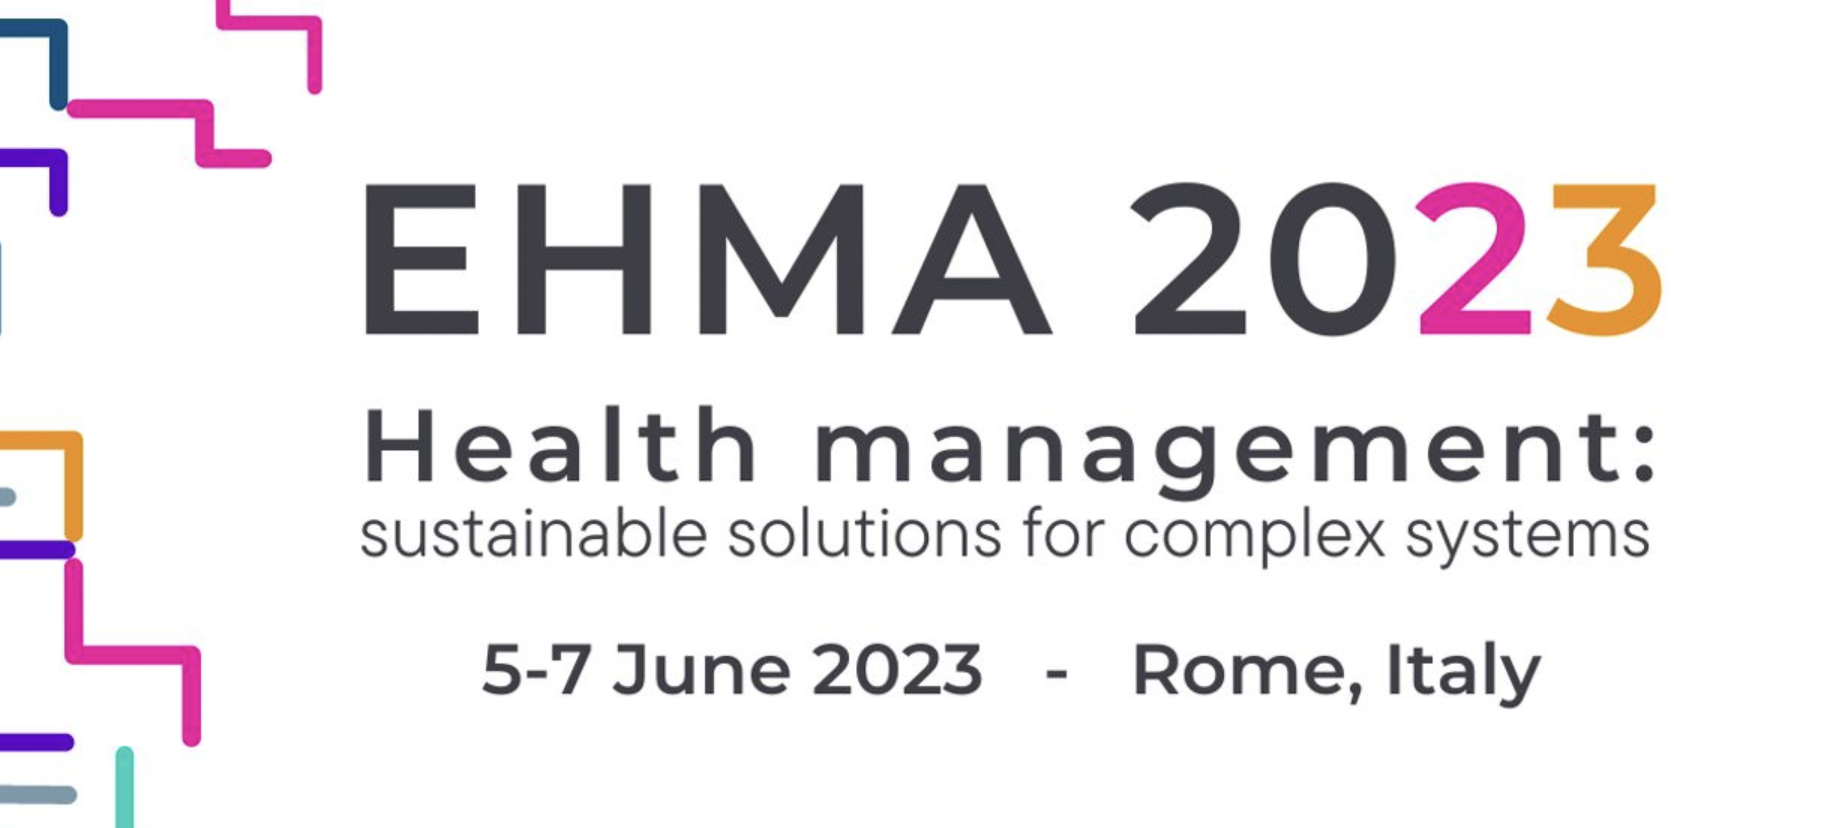 EHMA 2023 - Health management: sustainable solutions for complex systems